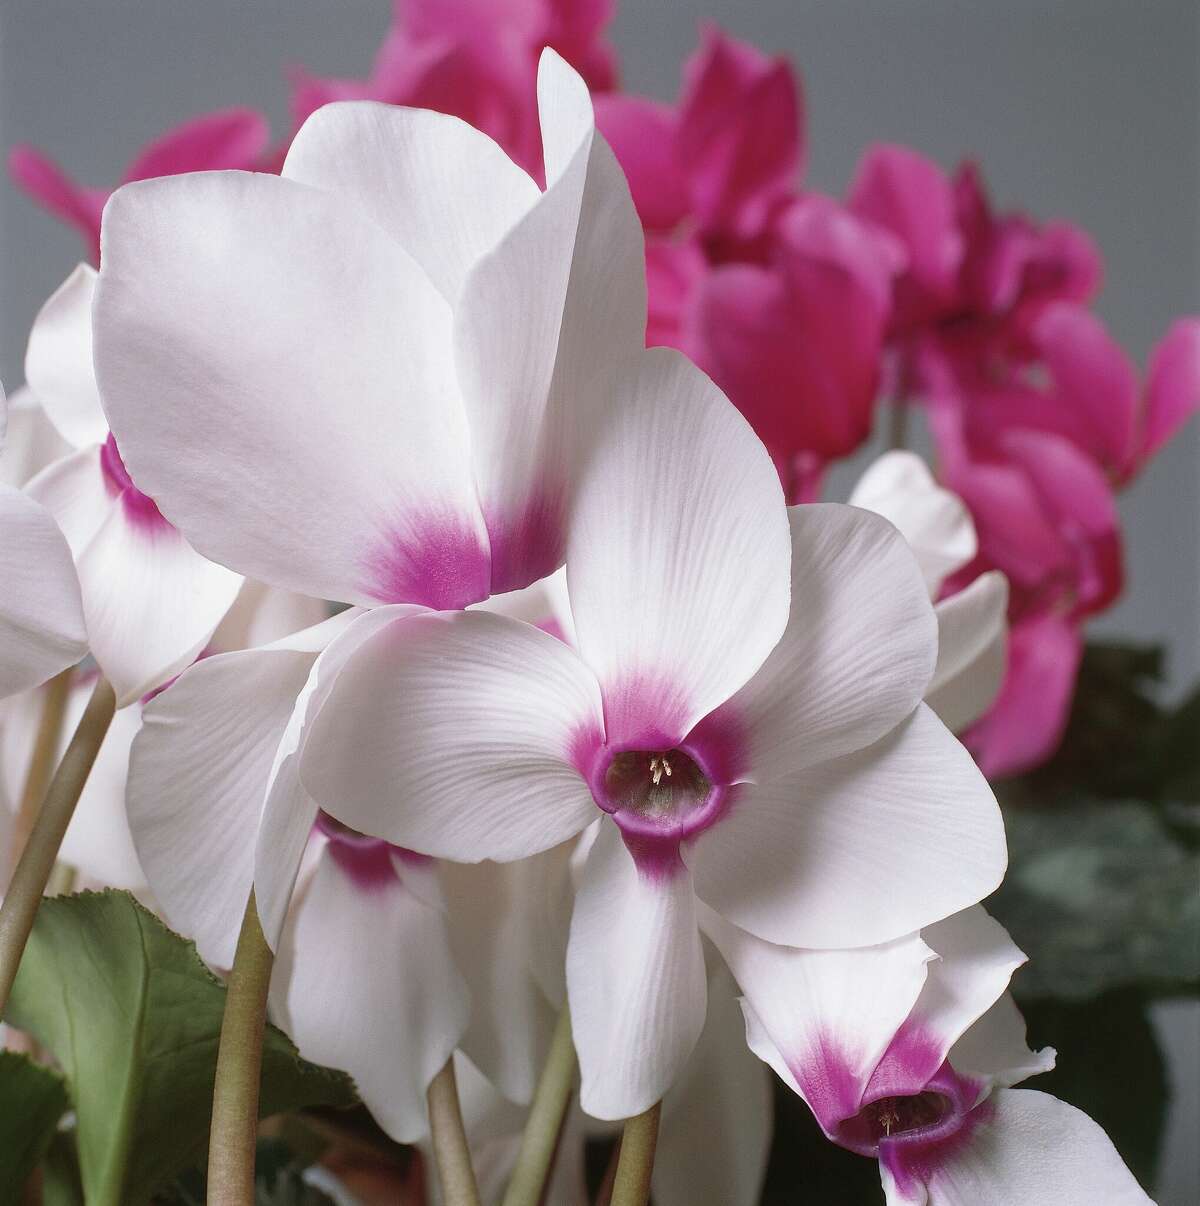 Cyclamen makes a great choice for an indoor plant. They produce beautiful blooms but also are low cost and low maintenance.